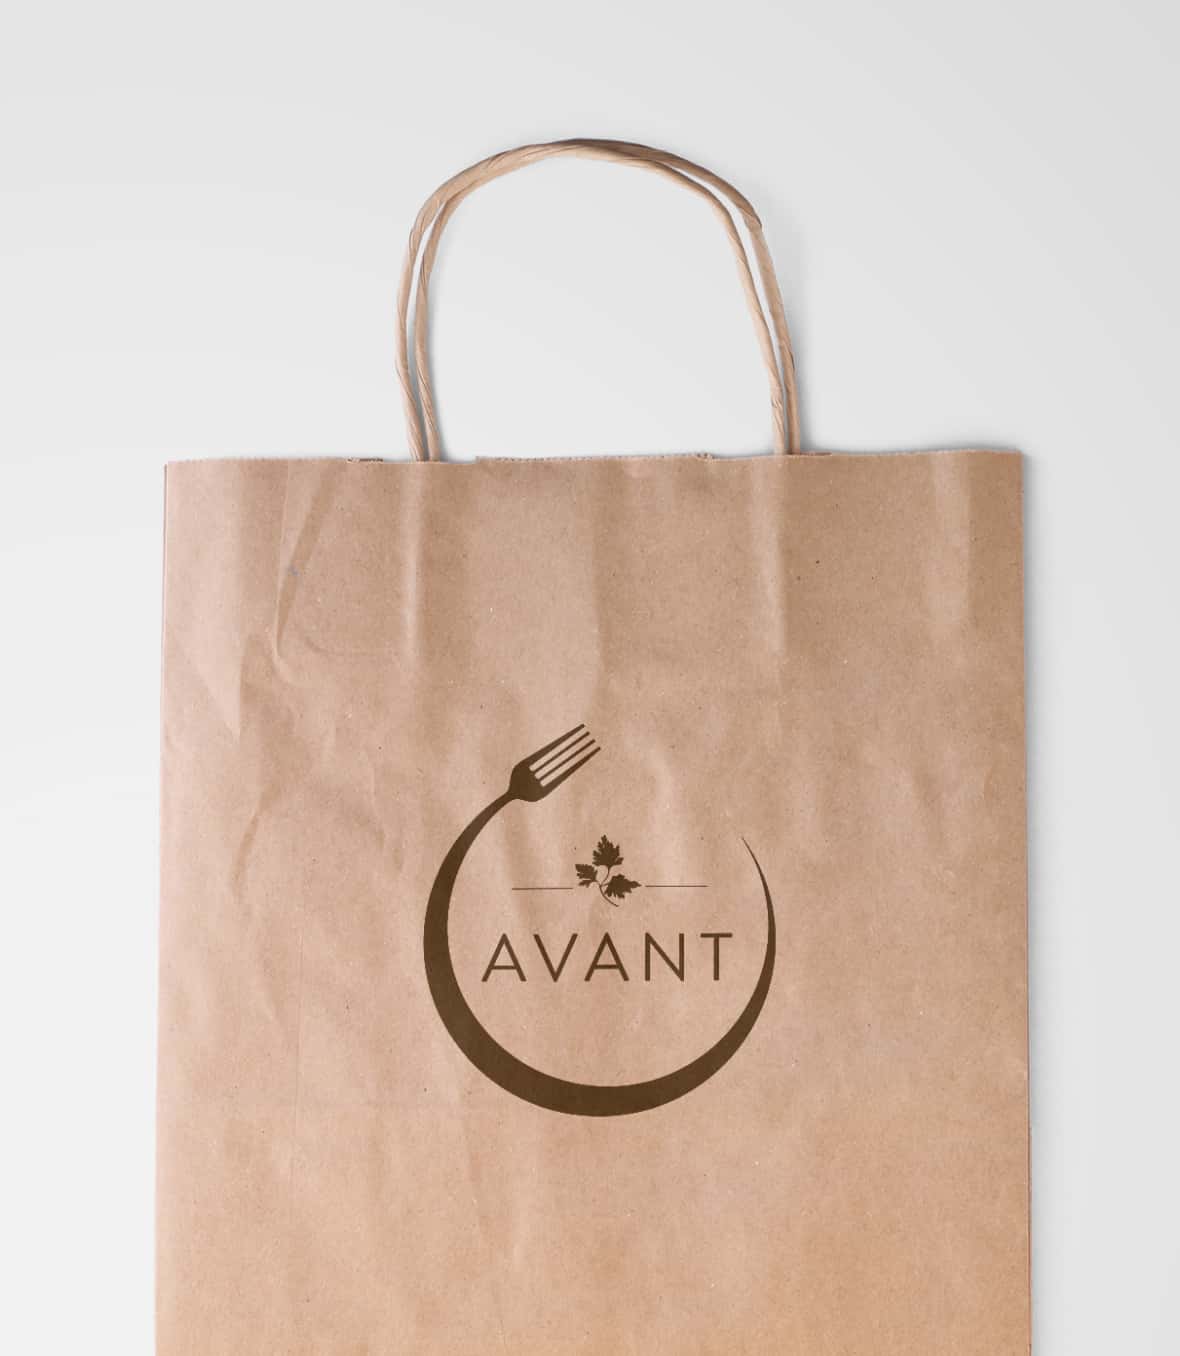 A paper take-out bag with the logo 'AVANT' printed on it.